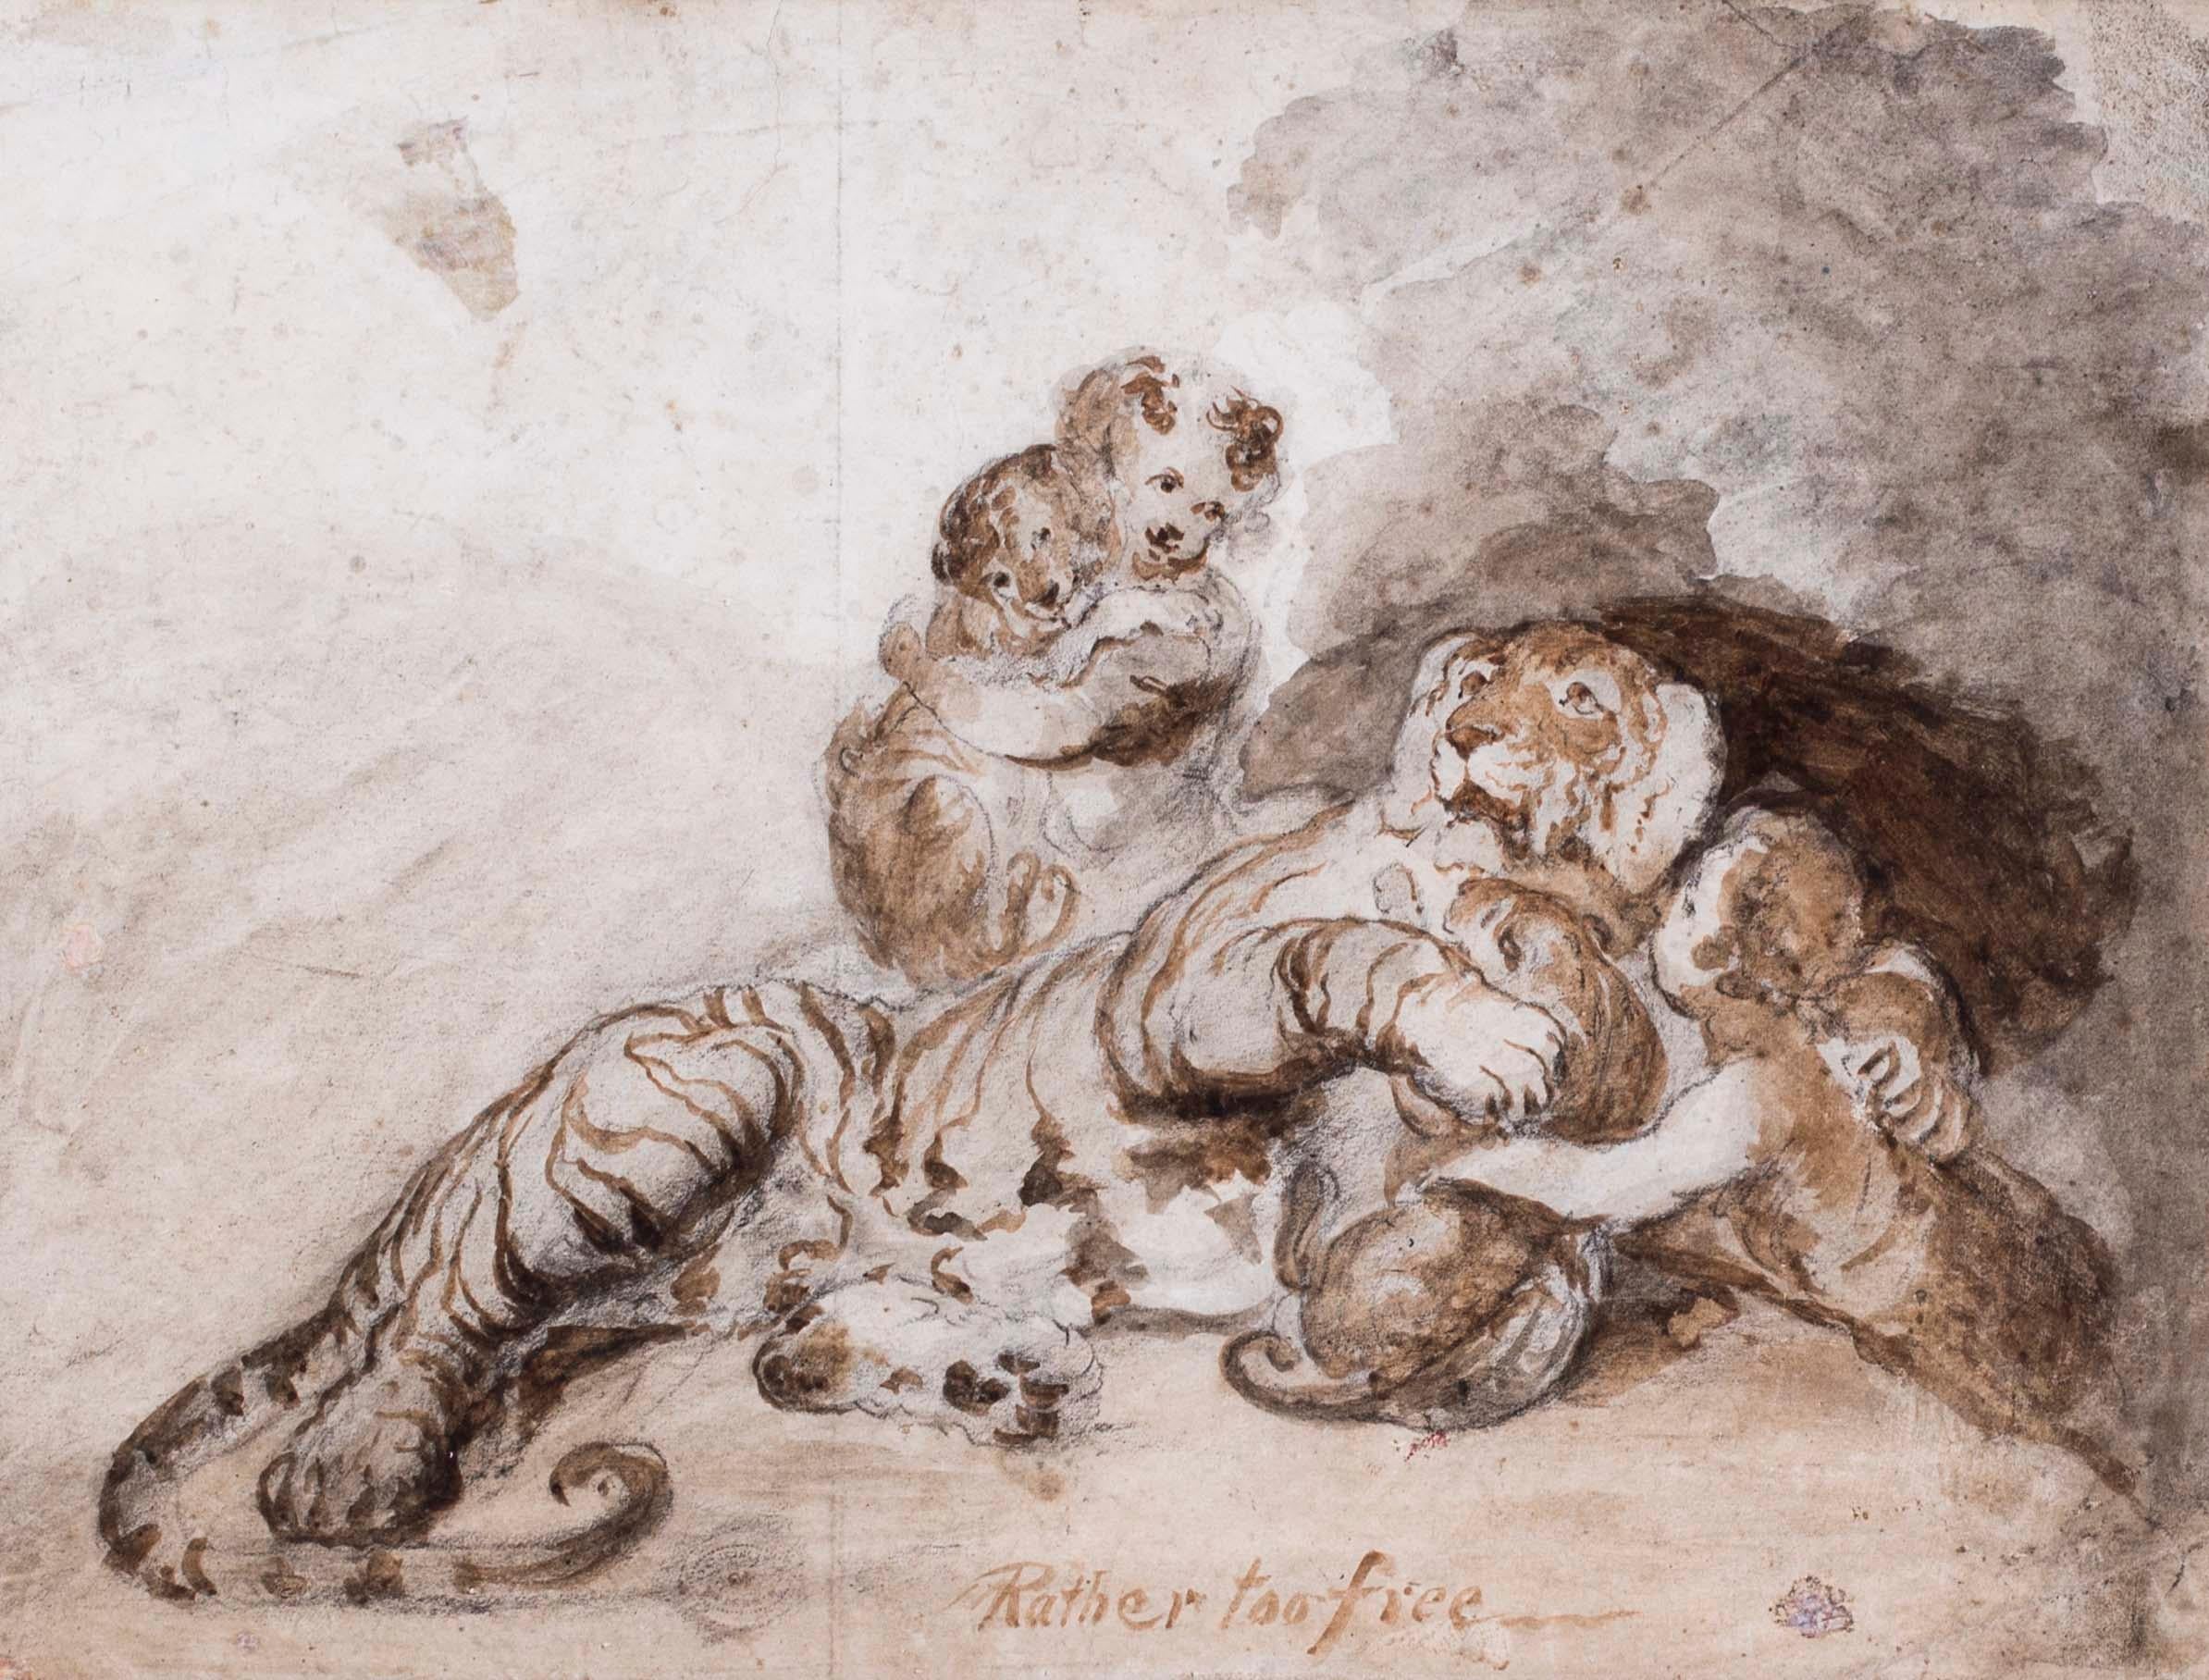 19th Century British drawing of a tiger, cubs and child attributed to Landseer - Art by Attributed to Sir Edwin Henry Landseer 